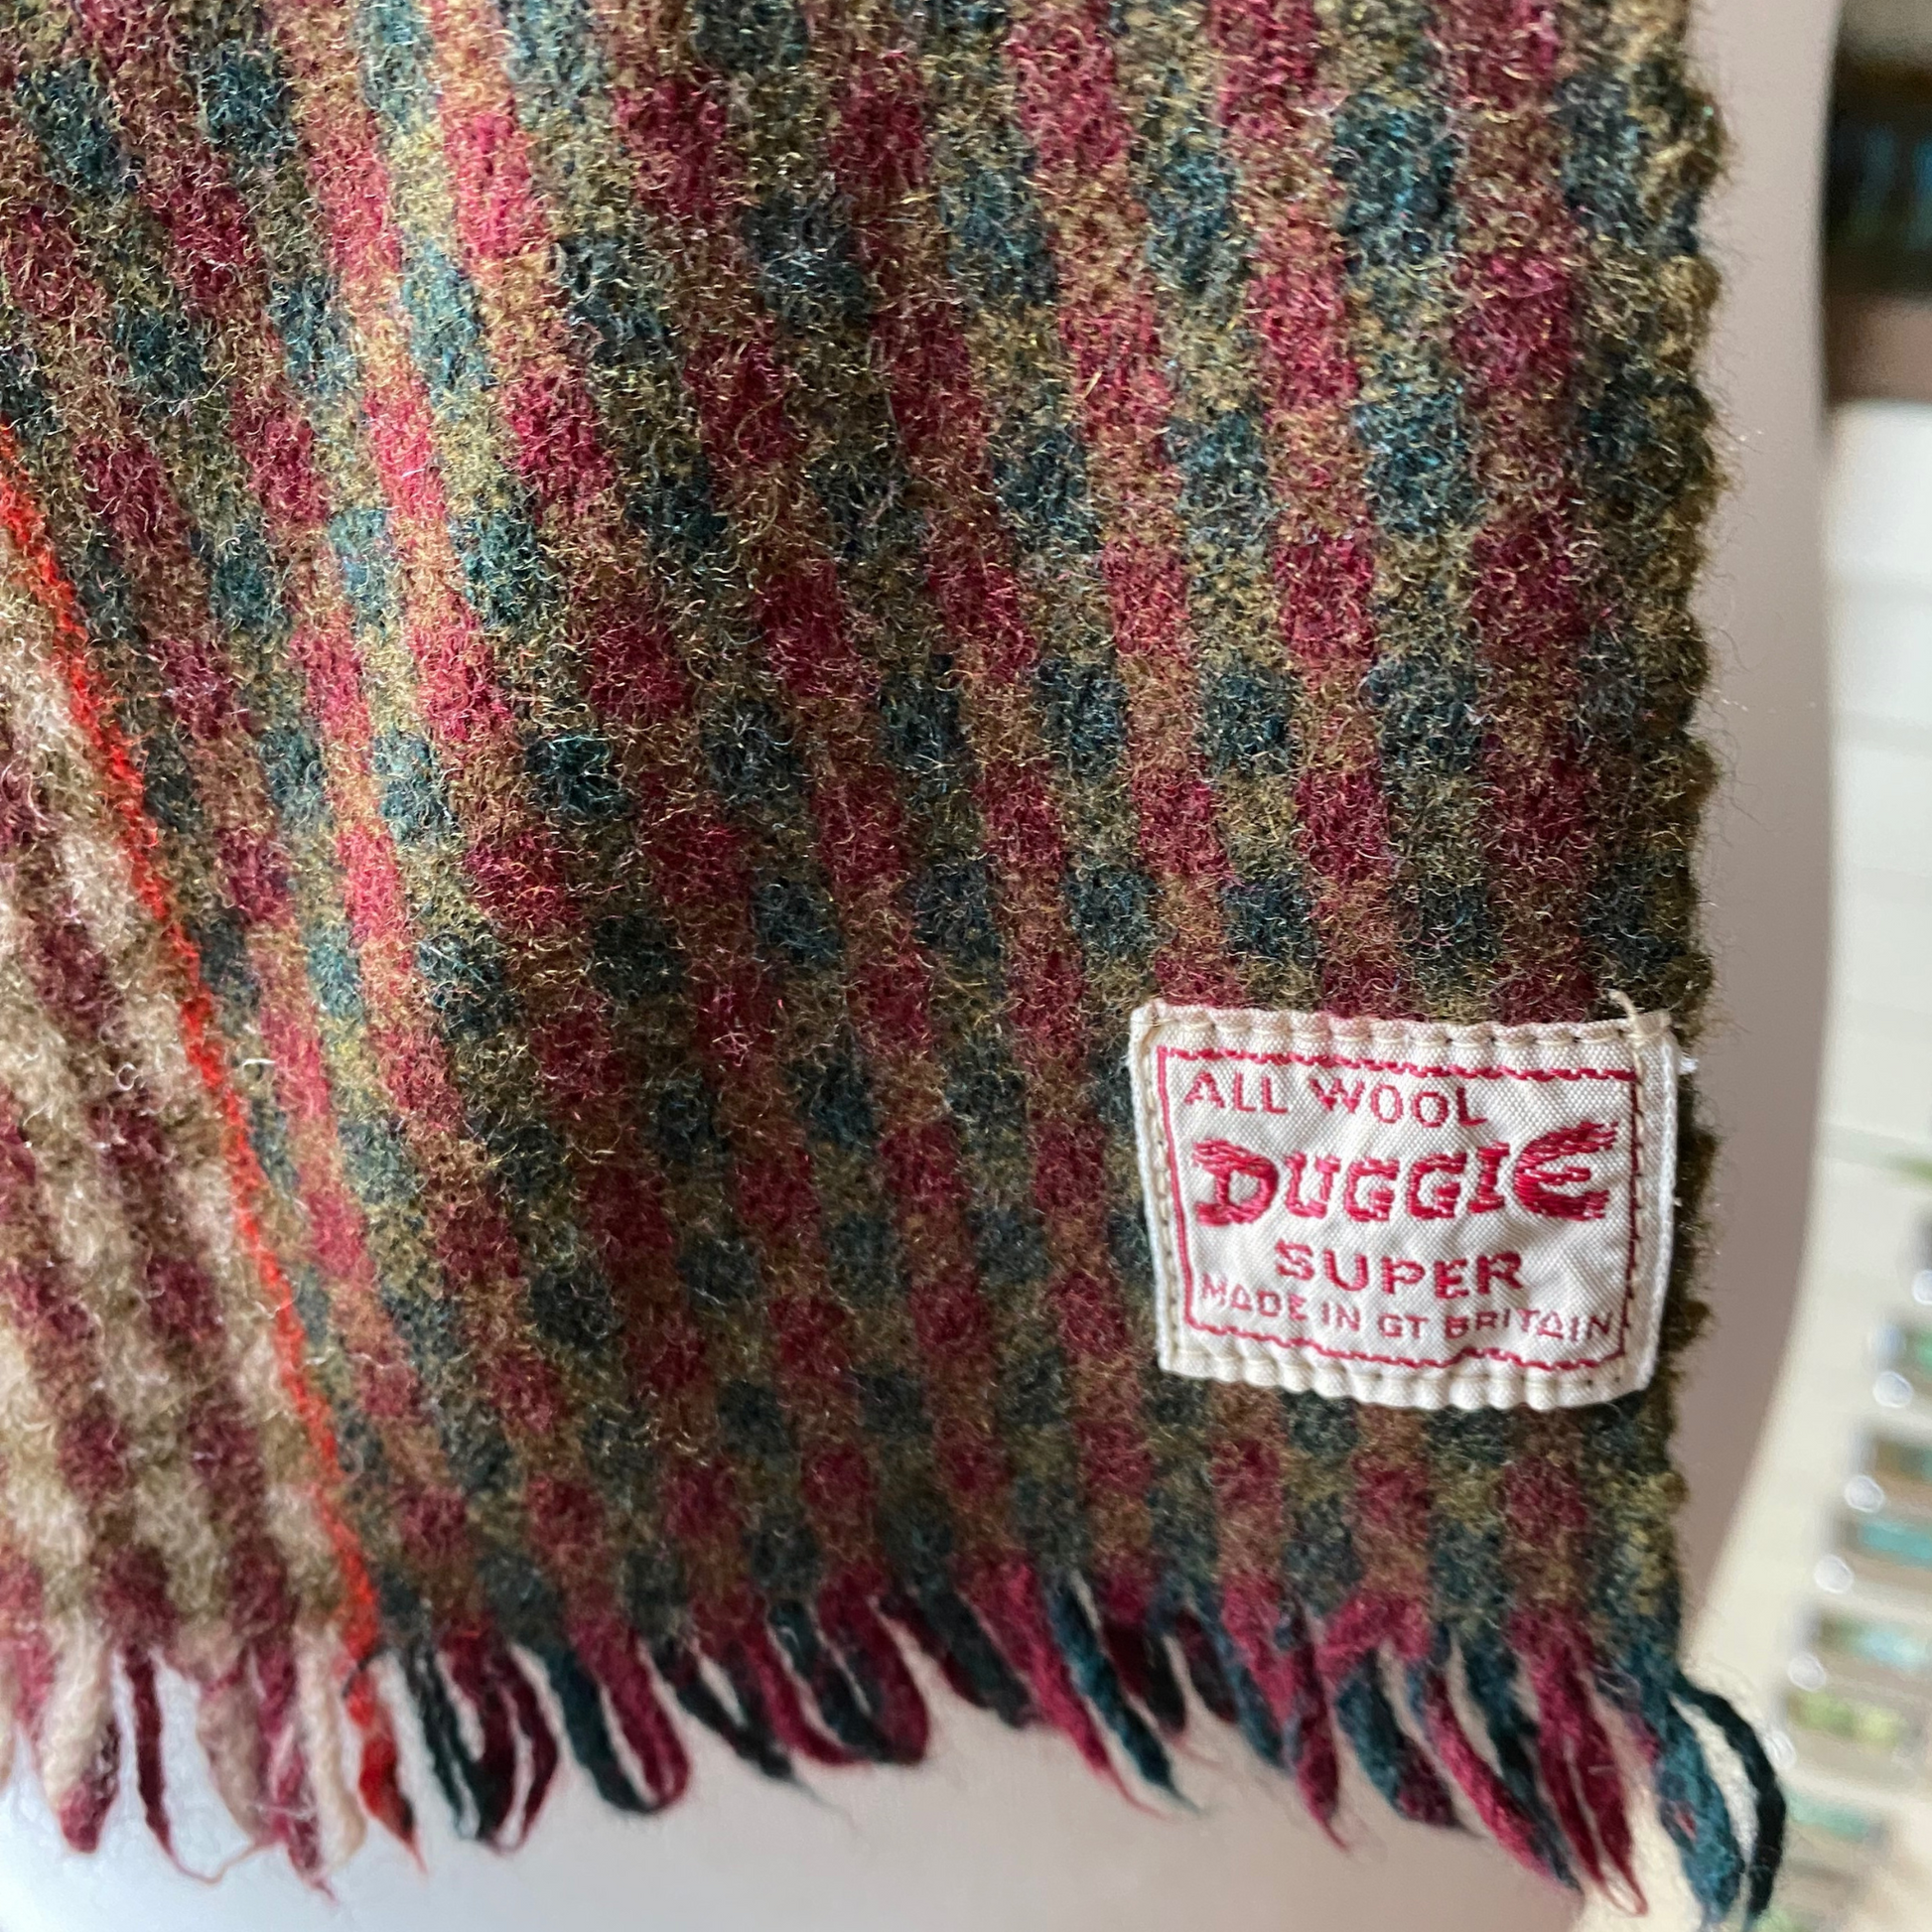 Close up of checked Duggie scarf label 